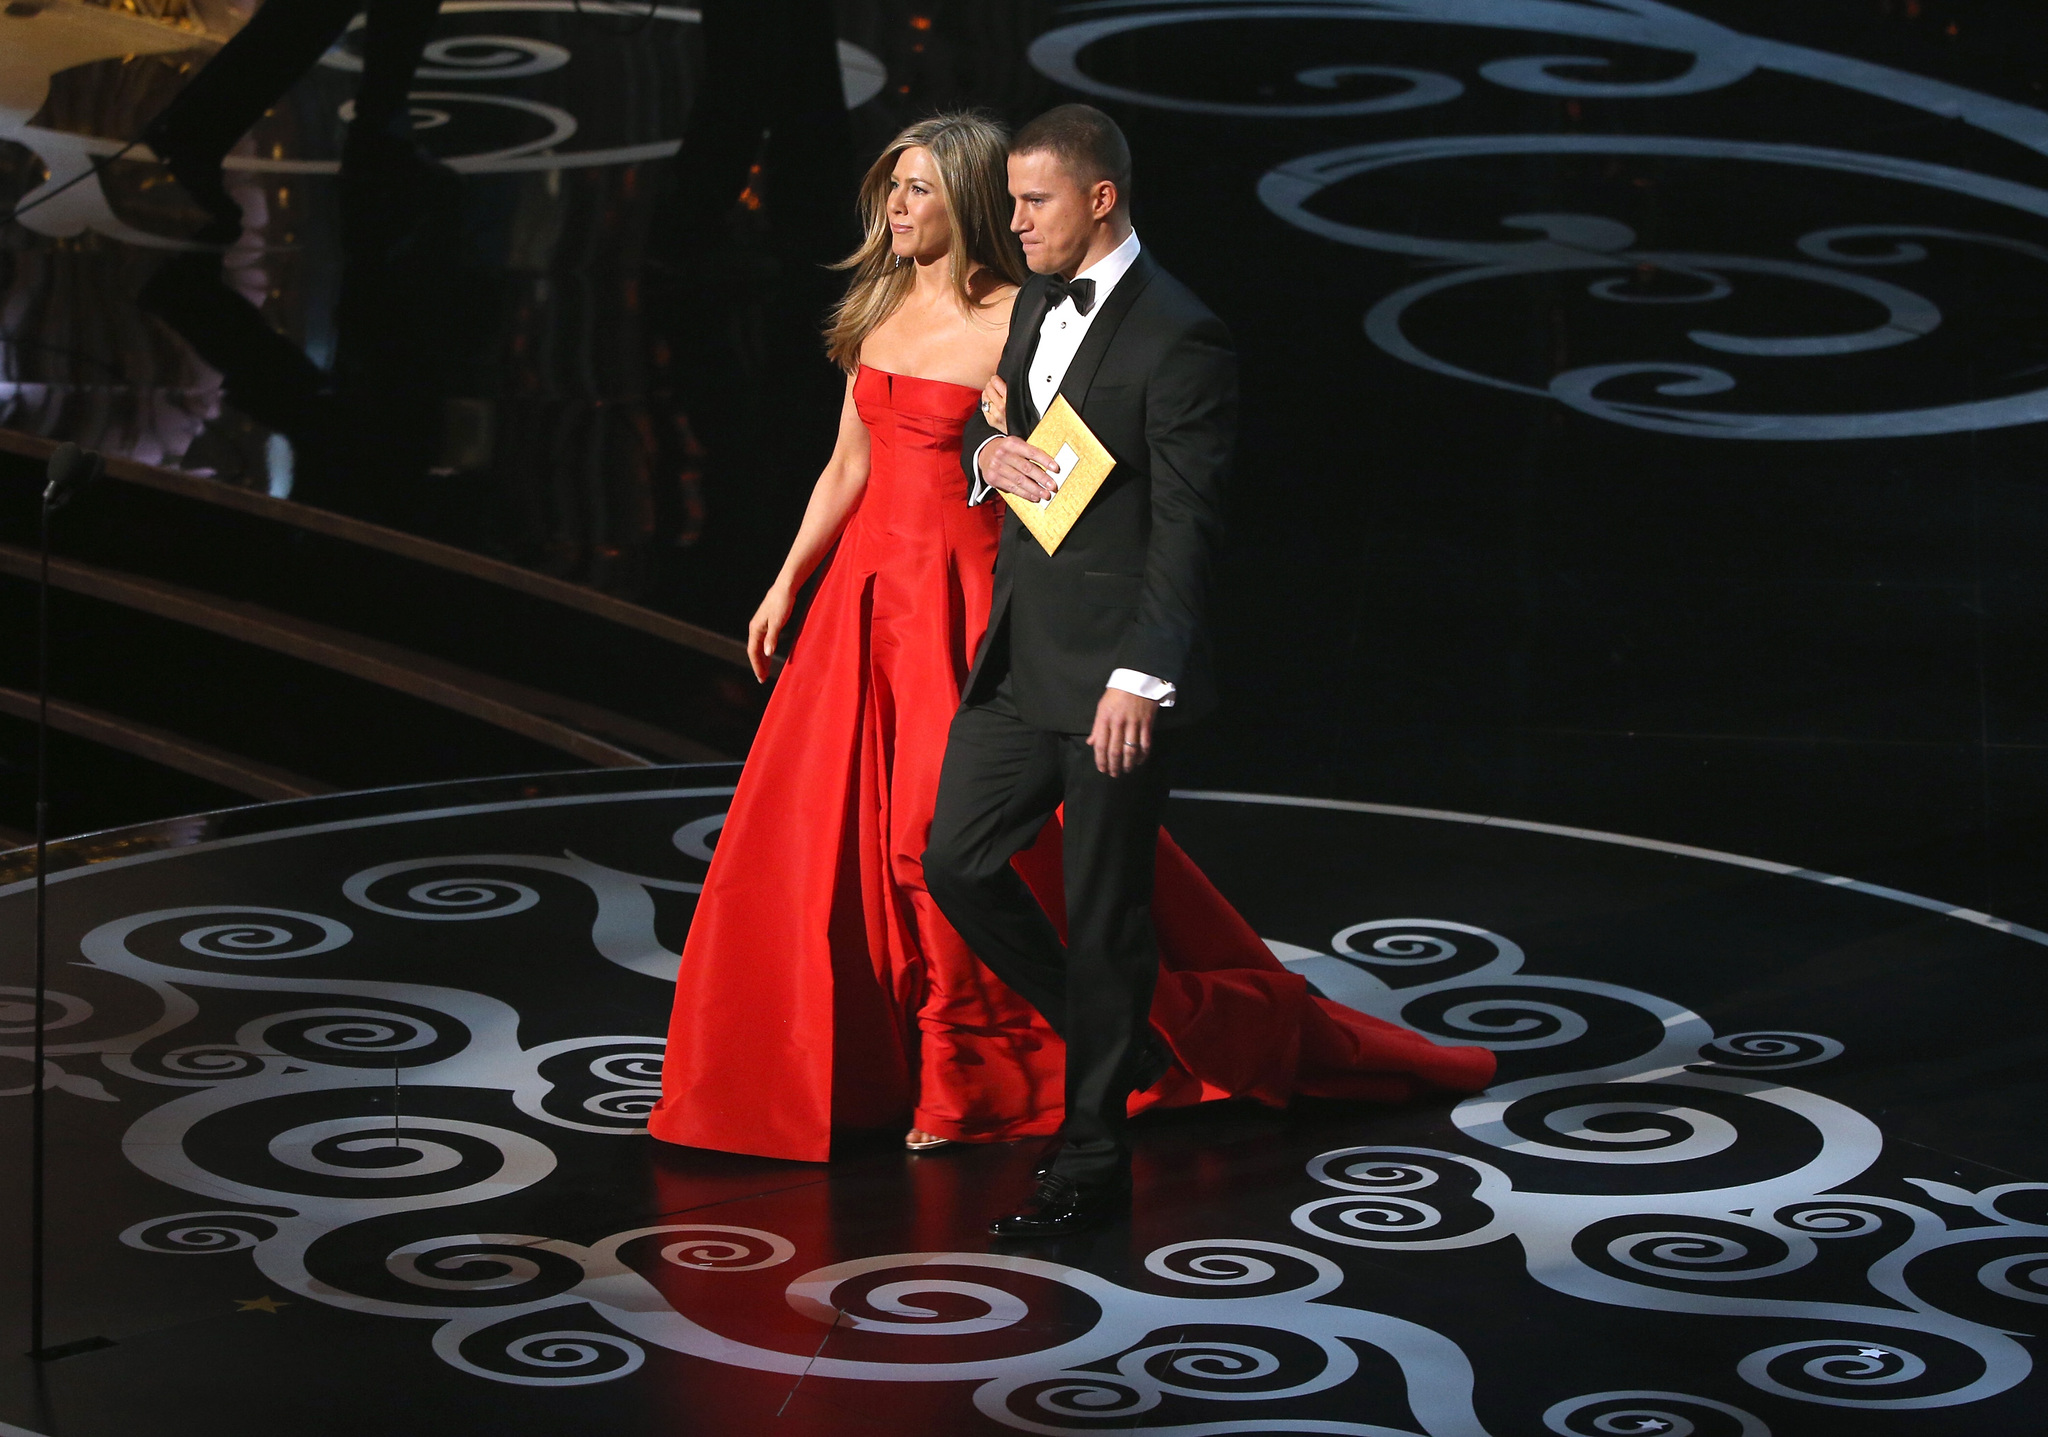 Jennifer Aniston and Channing Tatum at event of The Oscars (2013)